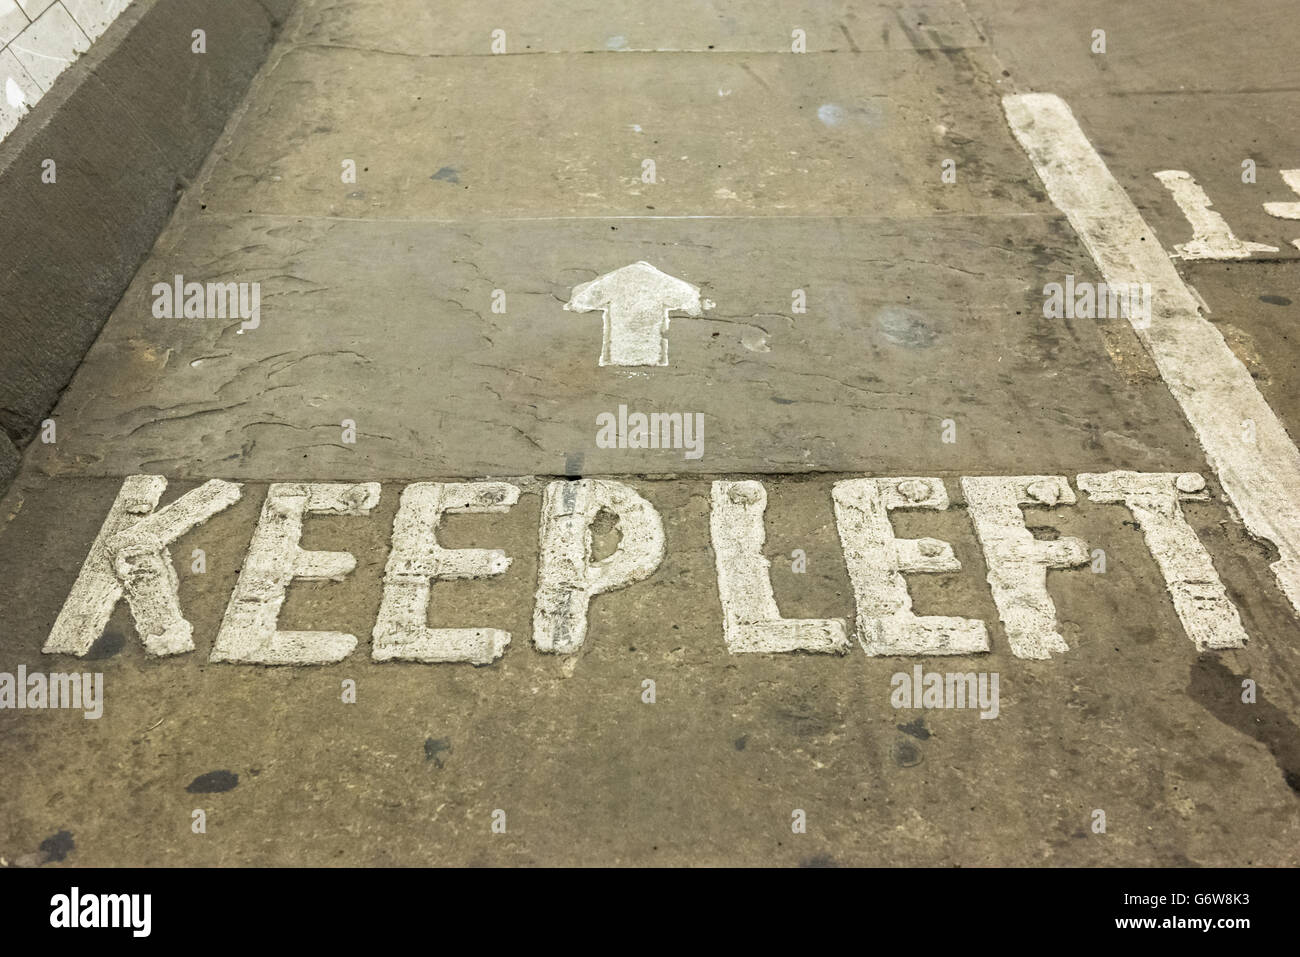 Keep left sign written on floor of Greenwich Tunnel in London, United Kingdom Stock Photo